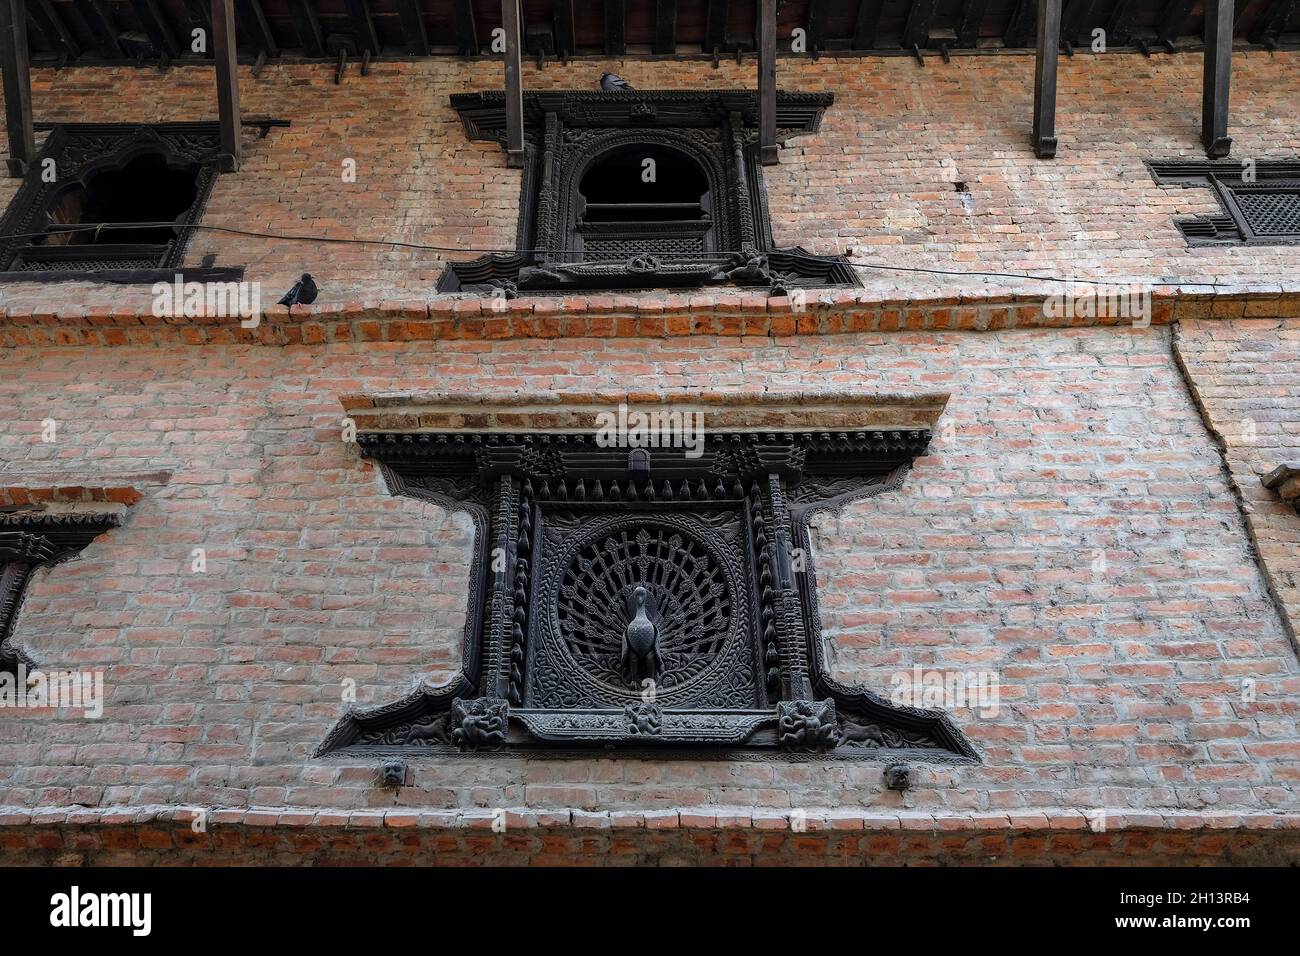 Peacock Window is an ornate wooden windows have been described as a symbol of Newar culture and artistry in Bhaktapur, Nepal Stock Photo